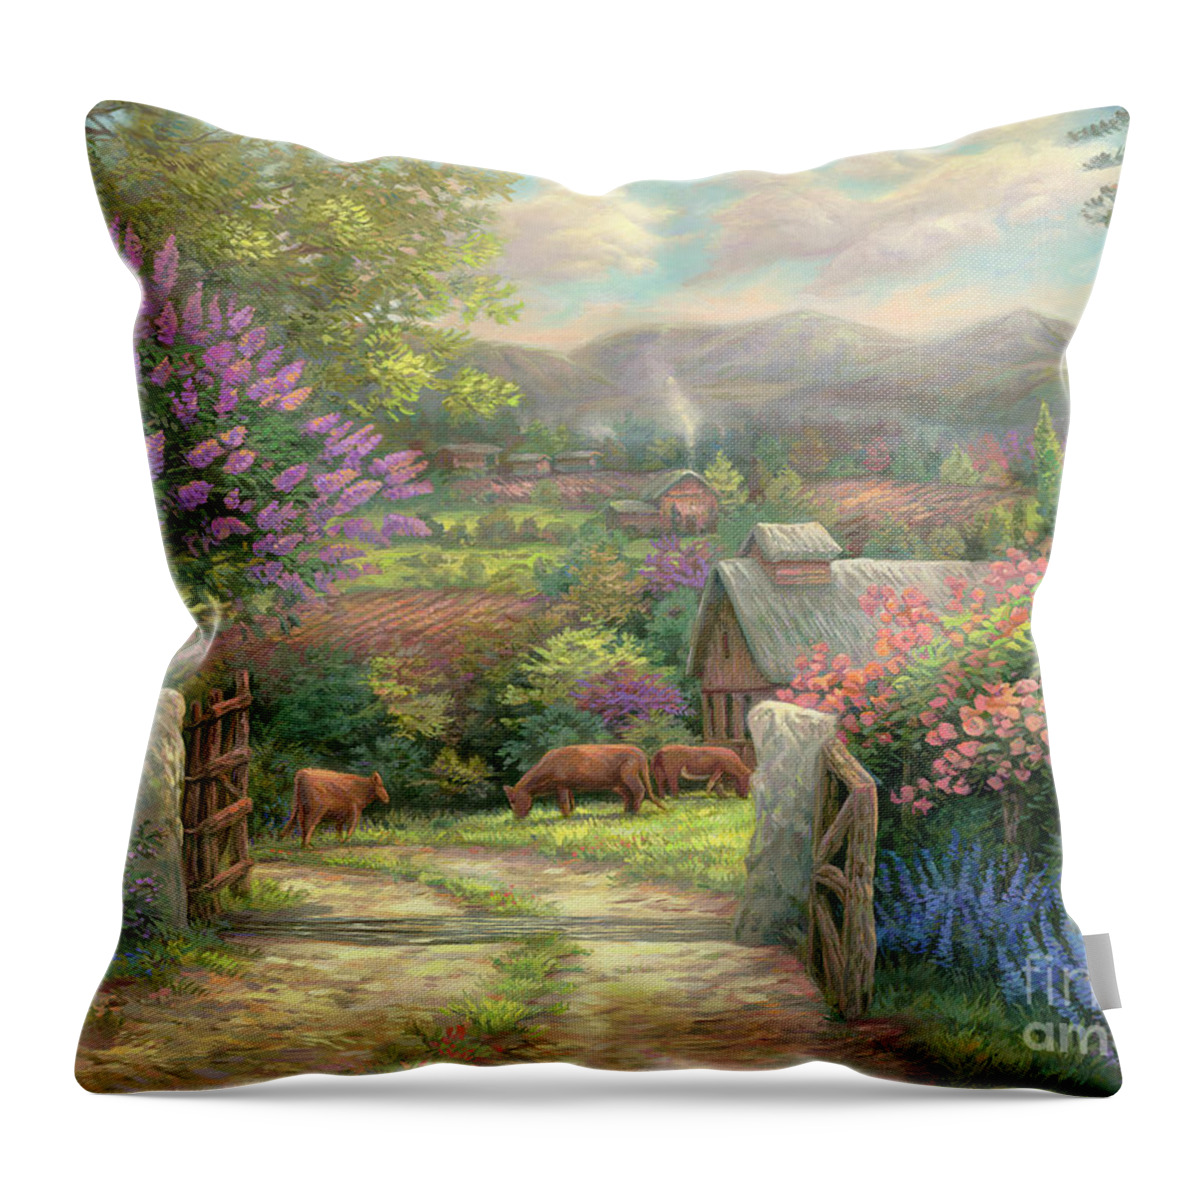 English Gate Throw Pillow featuring the painting Country Gate by Chuck Pinson